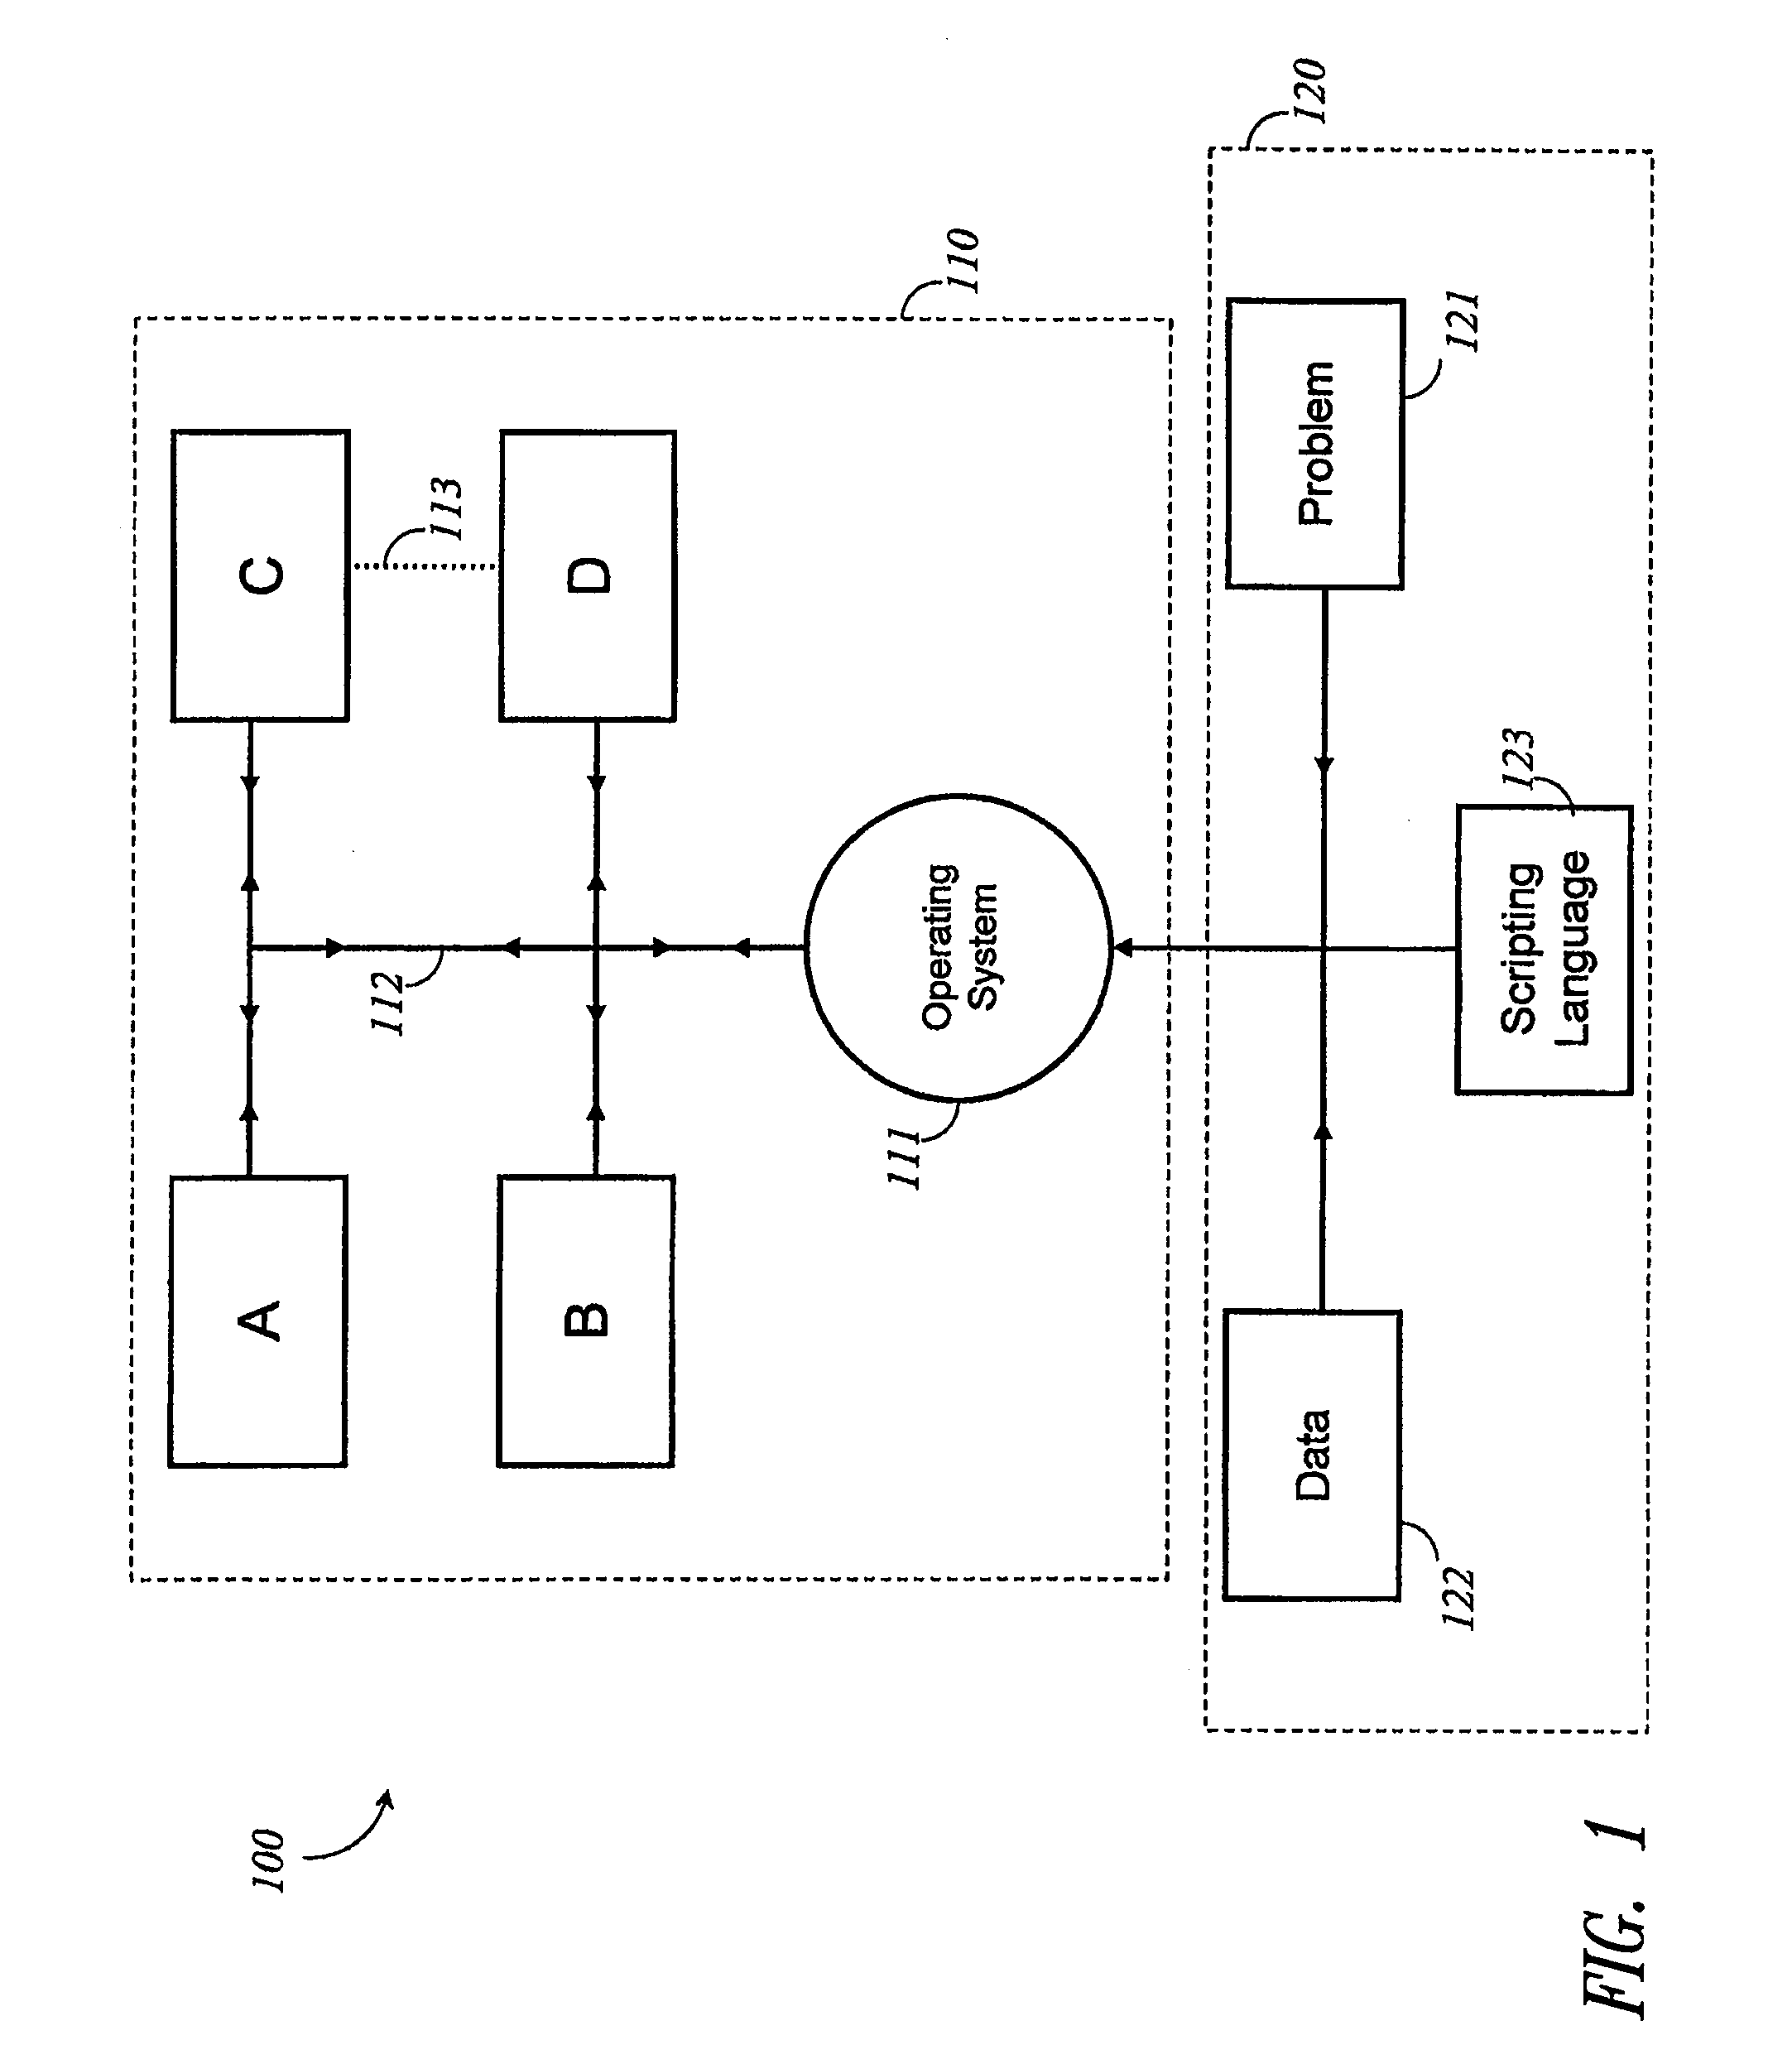 Systems, methods, and apparatus for a distributed network of quantum computers